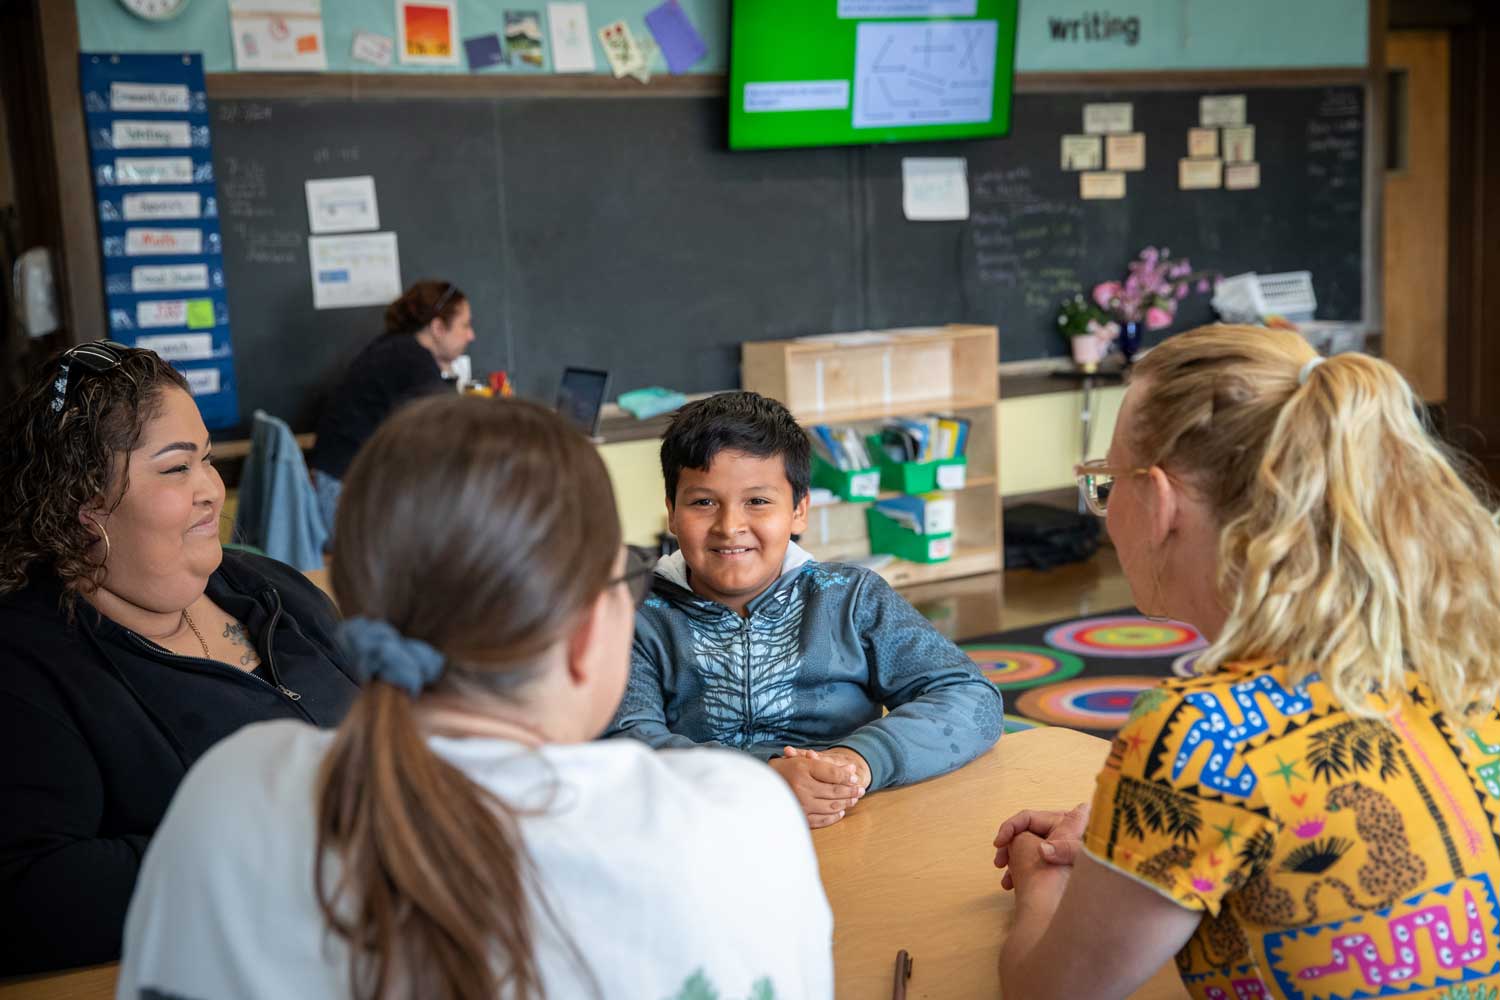 Andrew with his mother, teacher, and social worker Jeannette Feddes meet in a classroom. They smile as they discuss his involvement in the Collaborative Life Skills program.